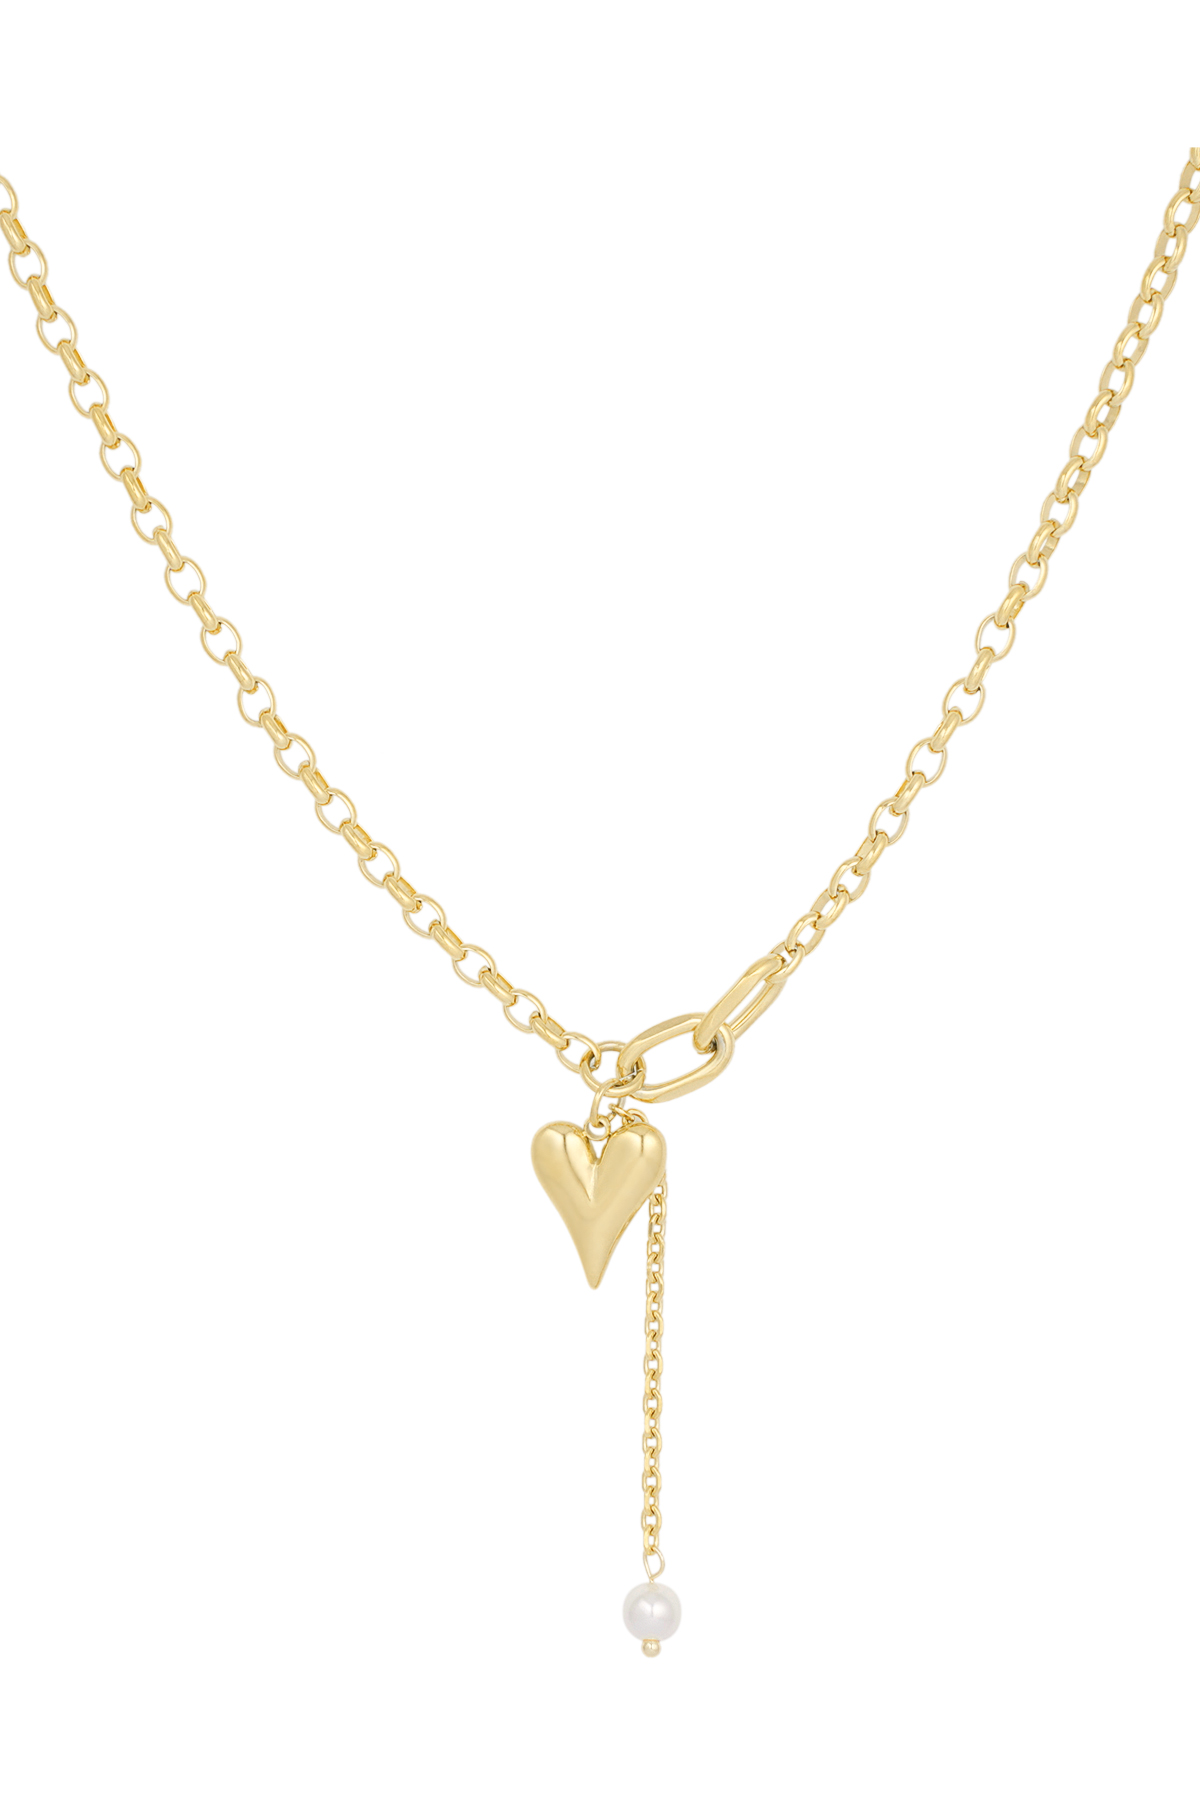 Necklace lovely hearts - gold h5 